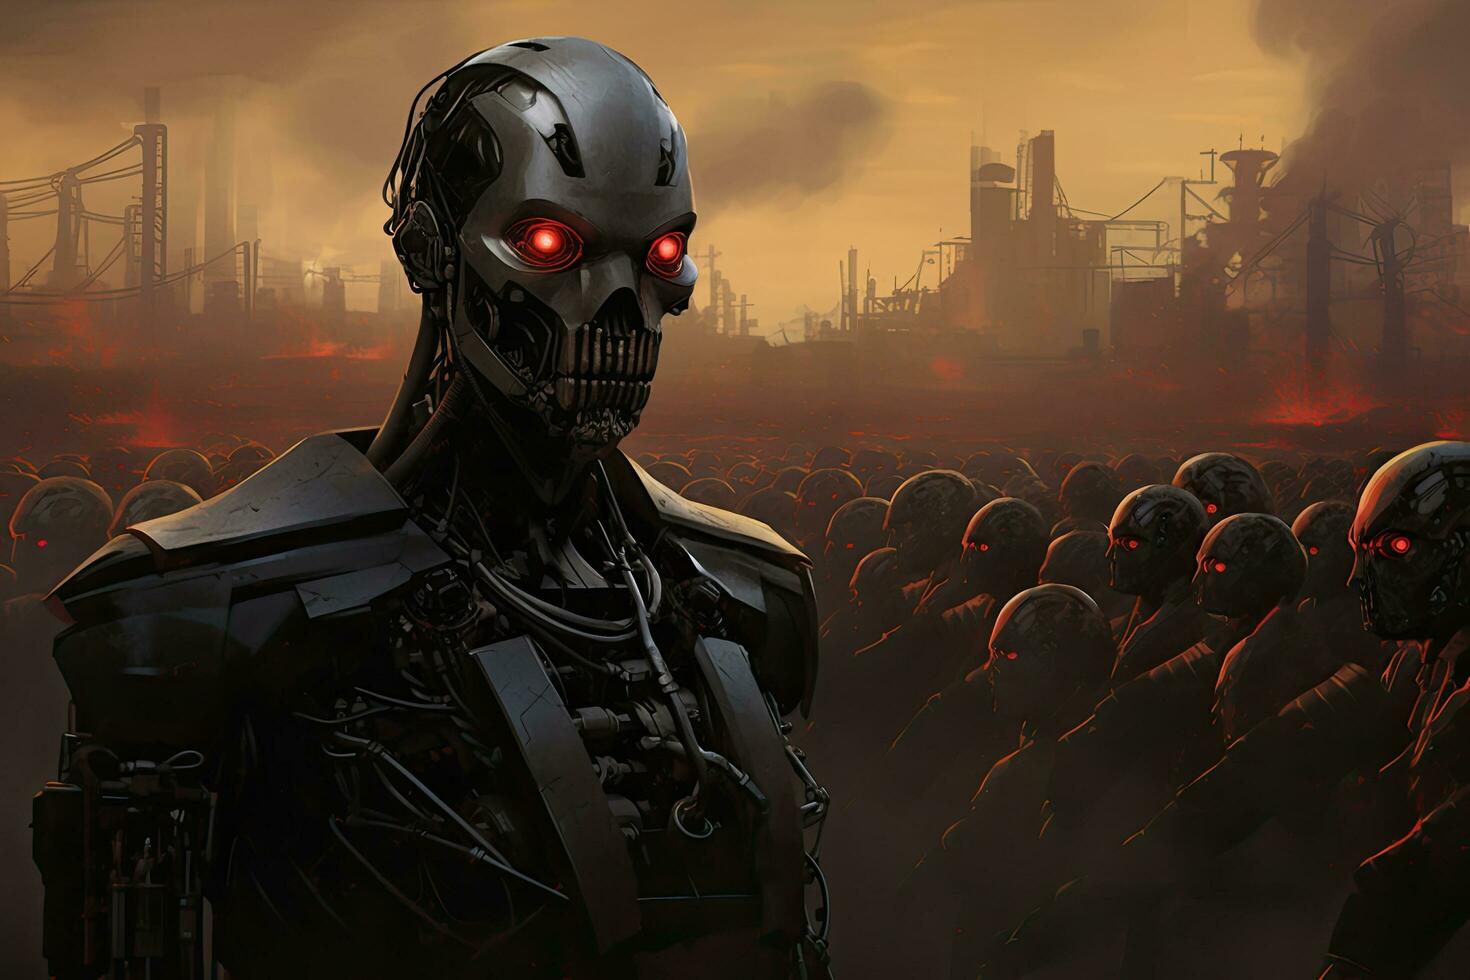 Cyborg in front of factory. 3D illustration. Fantasy, Humanity's Last Stand A masked human leader defiantly leads the final resistance against overwhelming AI robots, AI Generated photo